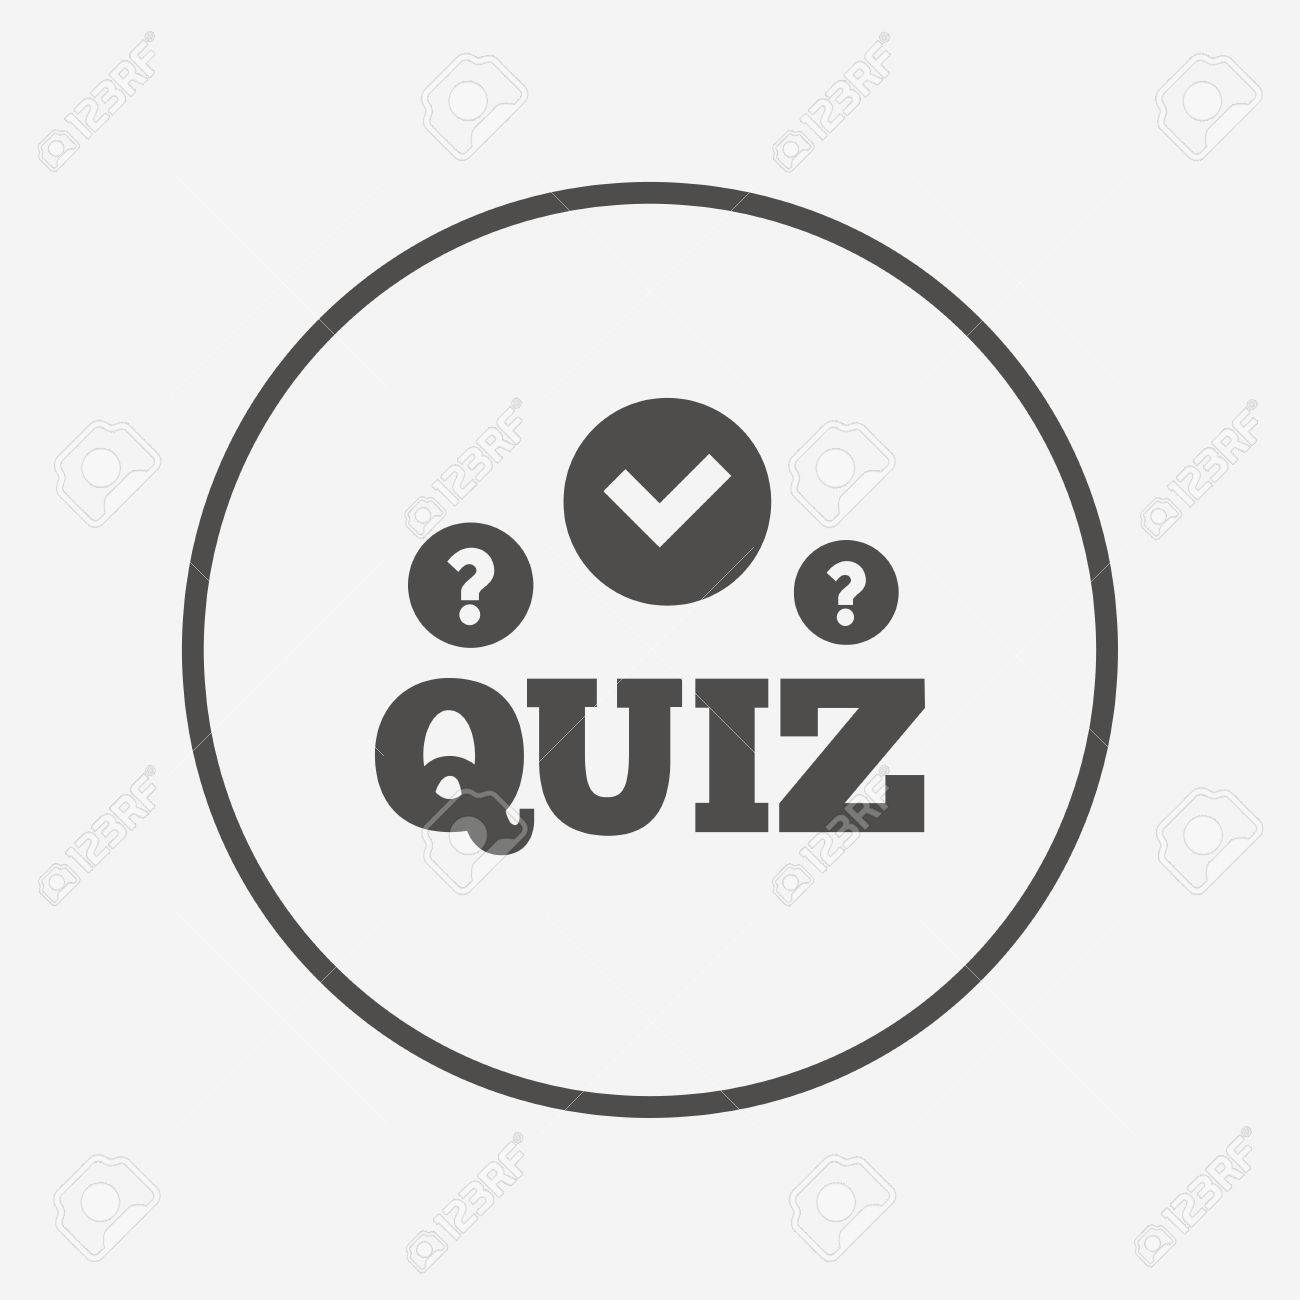 How To Conduct a Quiz in 6 Simple Steps